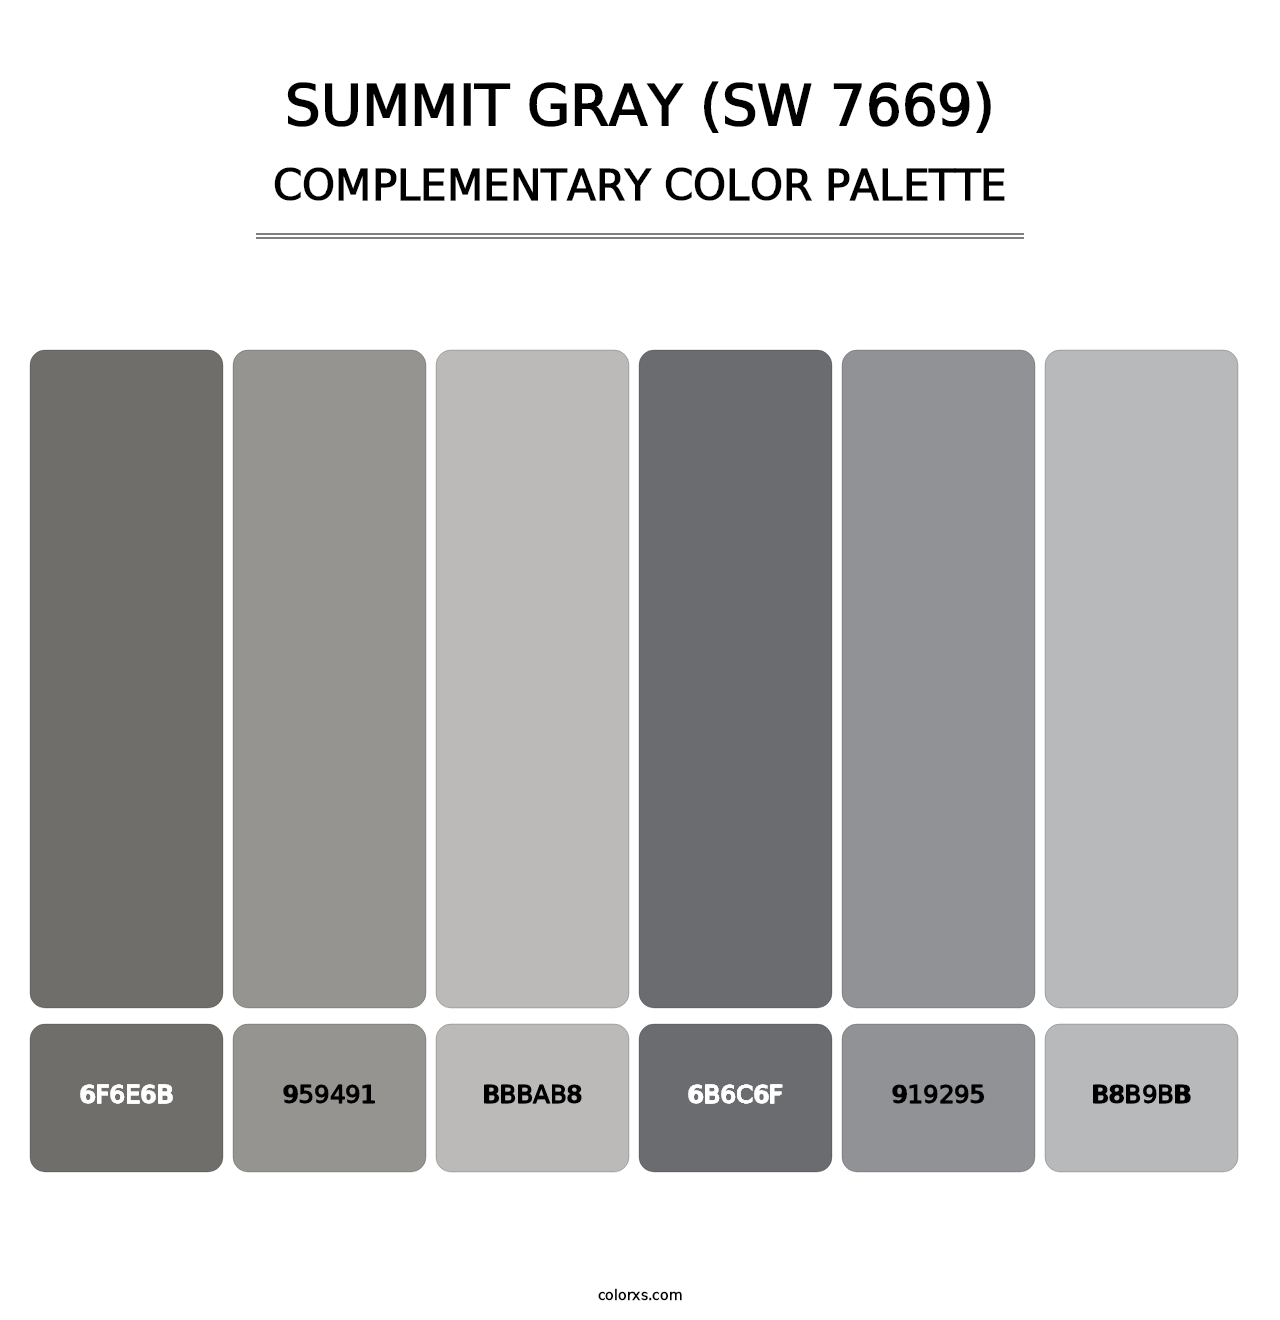 Summit Gray (SW 7669) - Complementary Color Palette